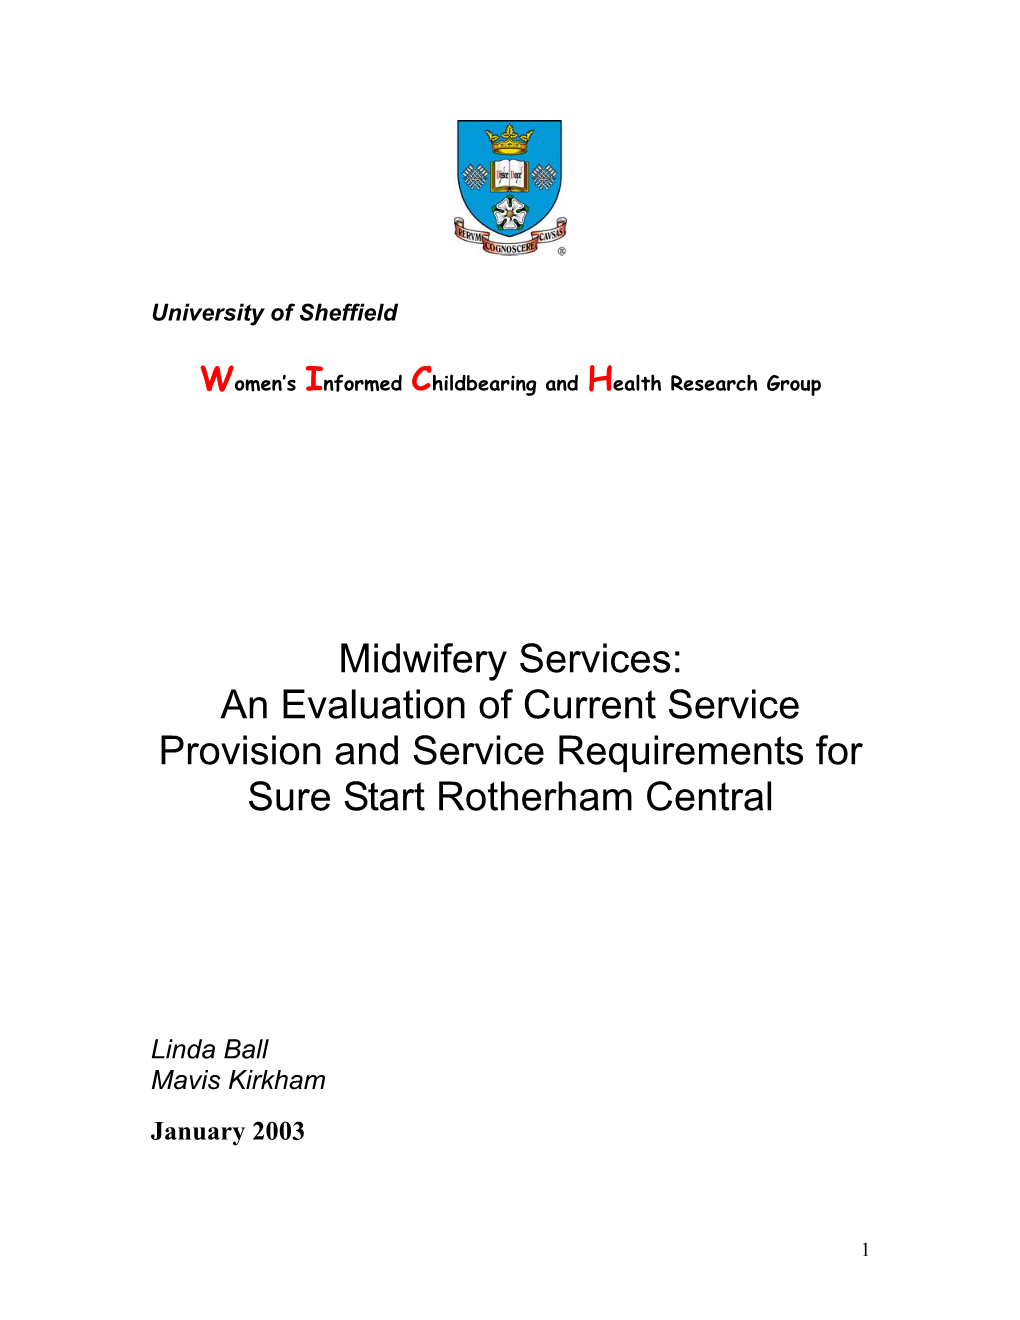 Midwifery Services: an Evaluation of Current Service Provision and Service Requirements for Sure Start Rotherham Central